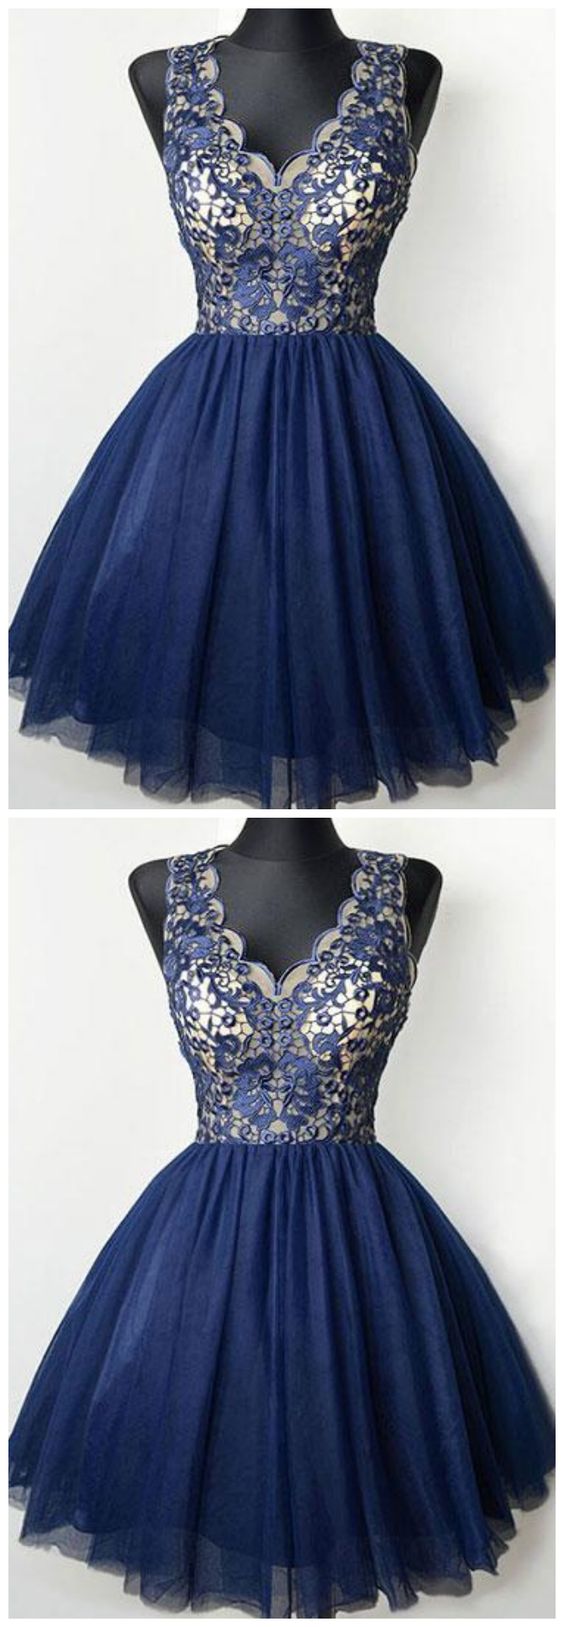 2020 Royal Blue Lace Short Prom Dress Off Shoulder Cocktail Party Gowns , Short Homecoming Dress, Short Cocktail Gowns